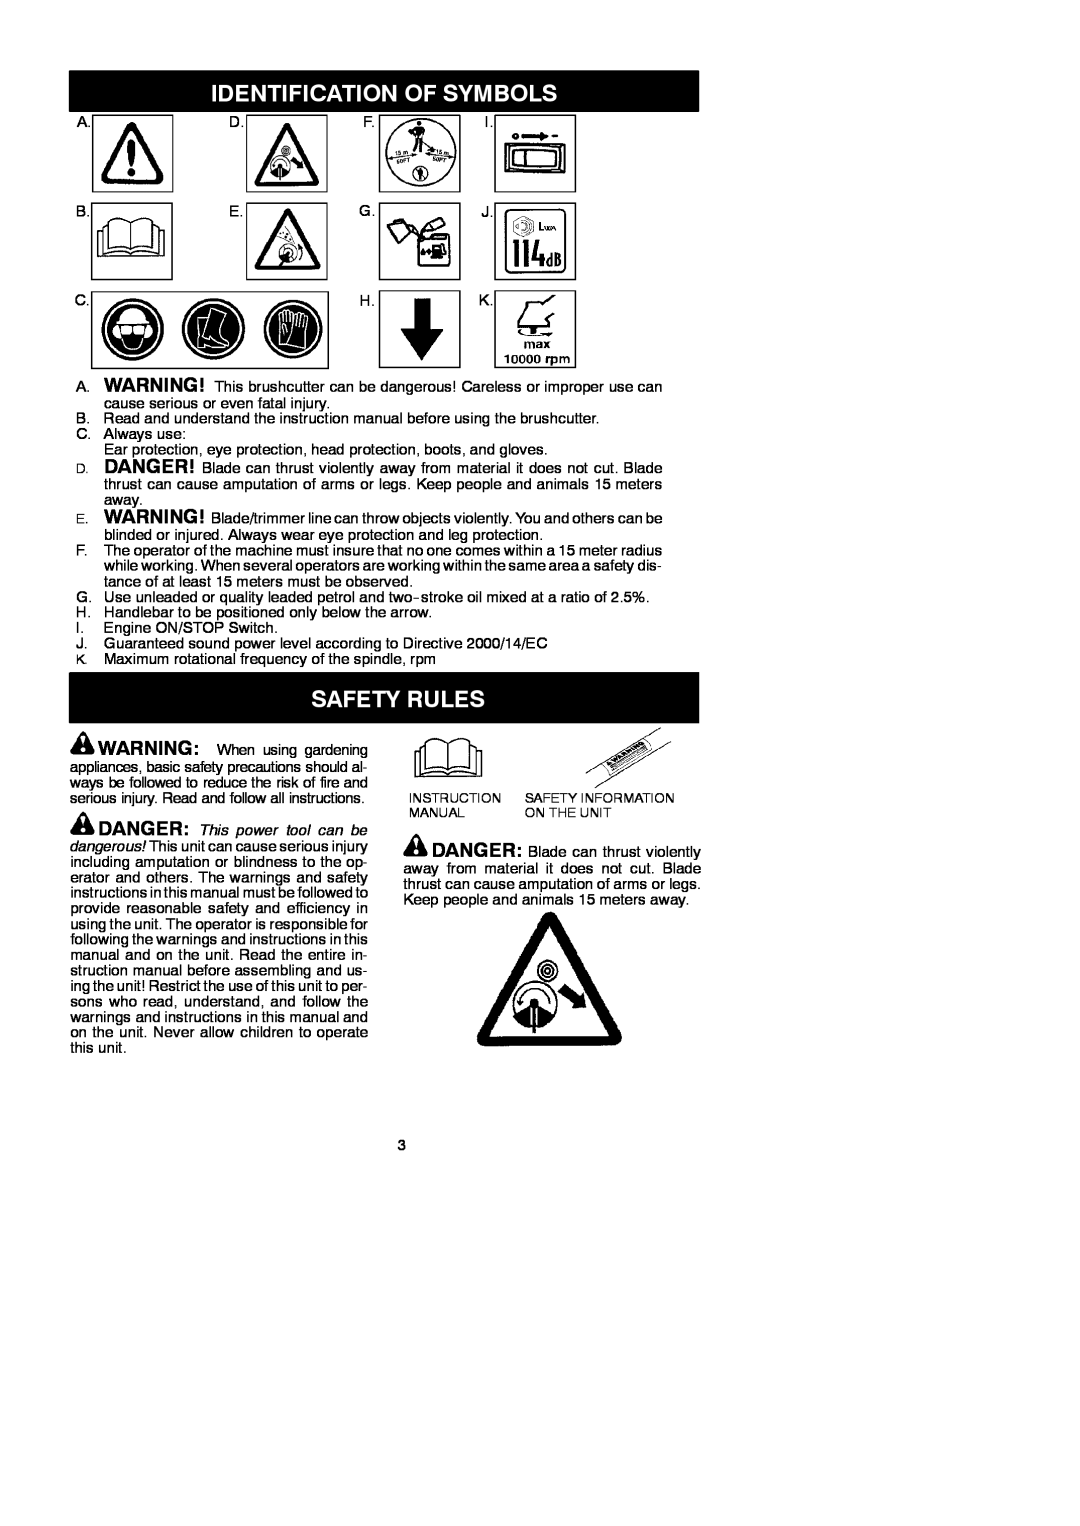 McCulloch 250 B instruction manual Identification Of Symbols, Safety Rules, DANGER This power tool can be 